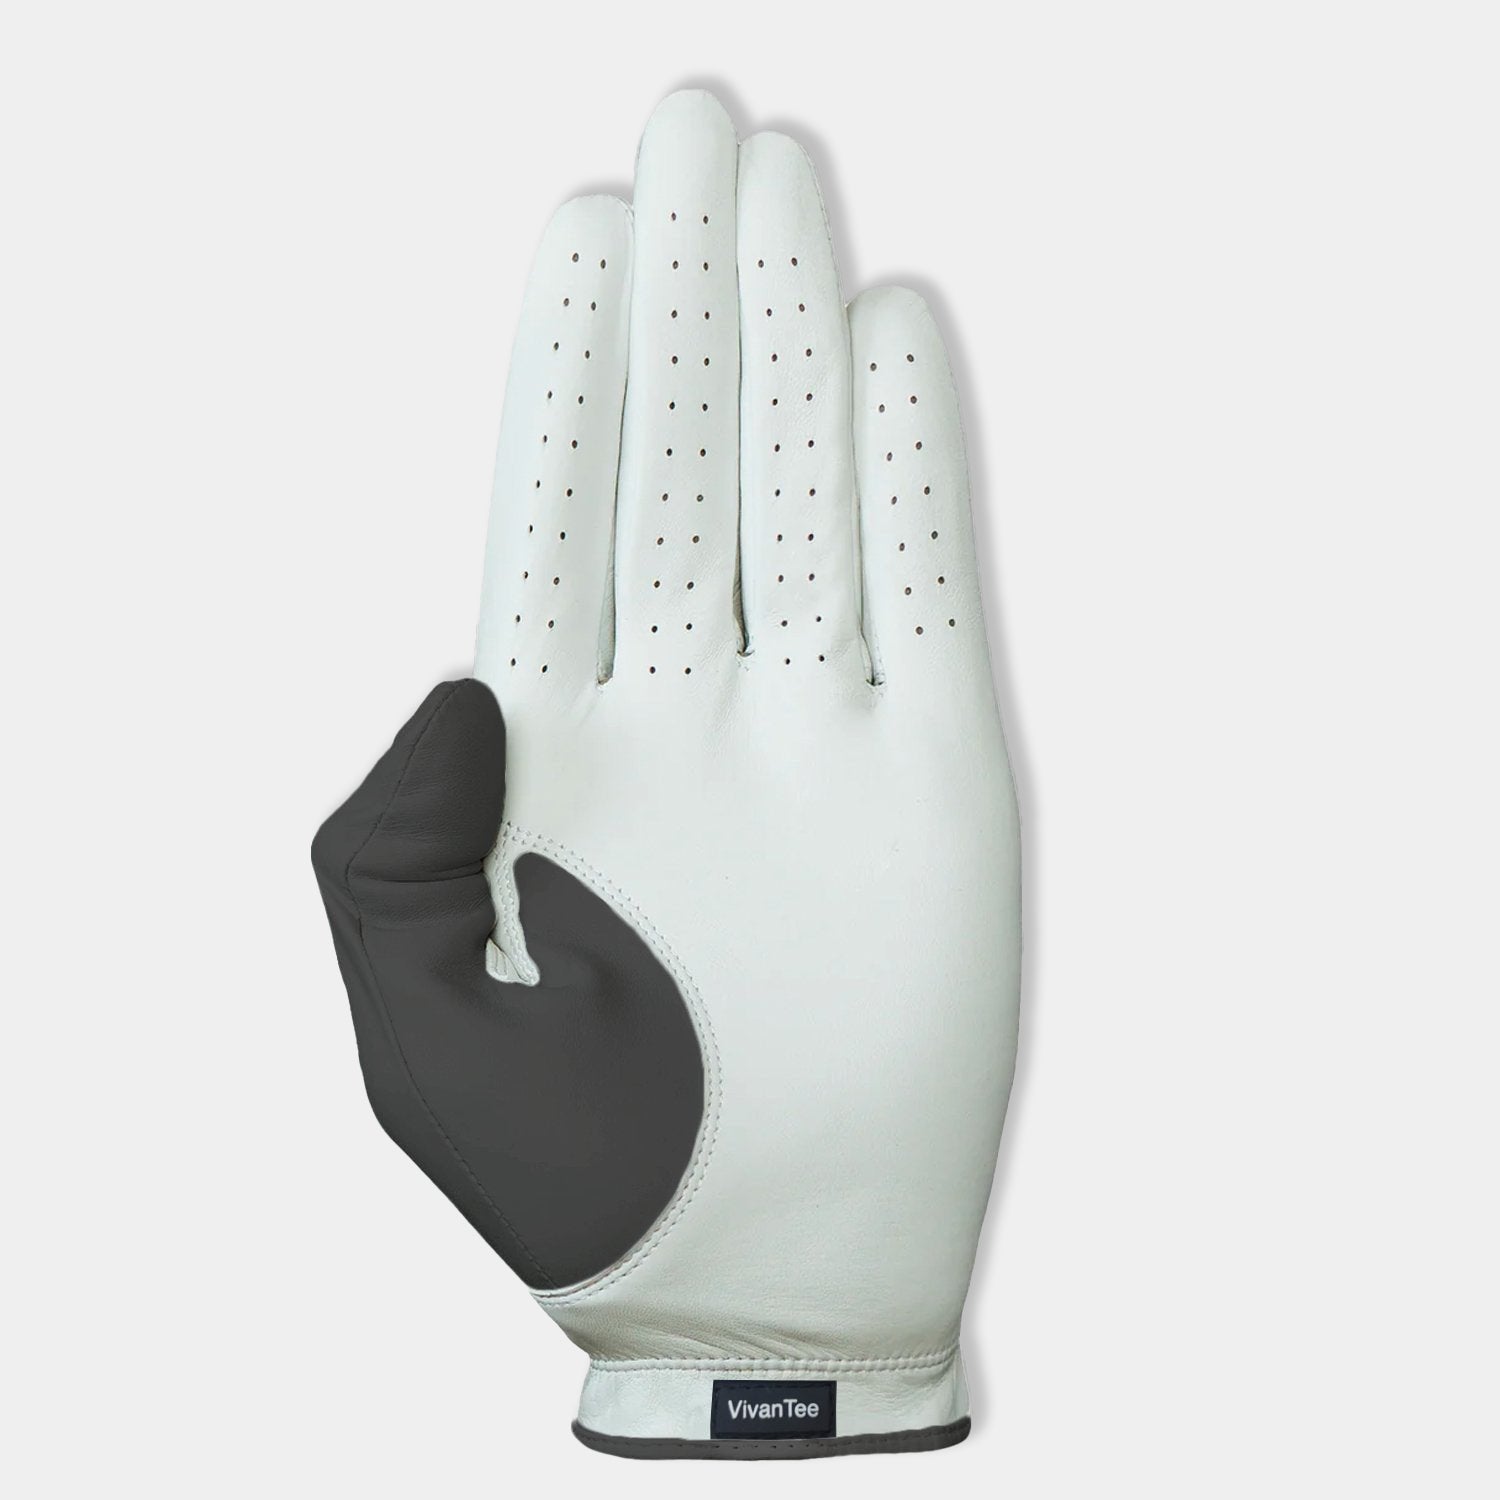 Bottom of charcoal and white colored golf glove for men, with VivanTee logo.